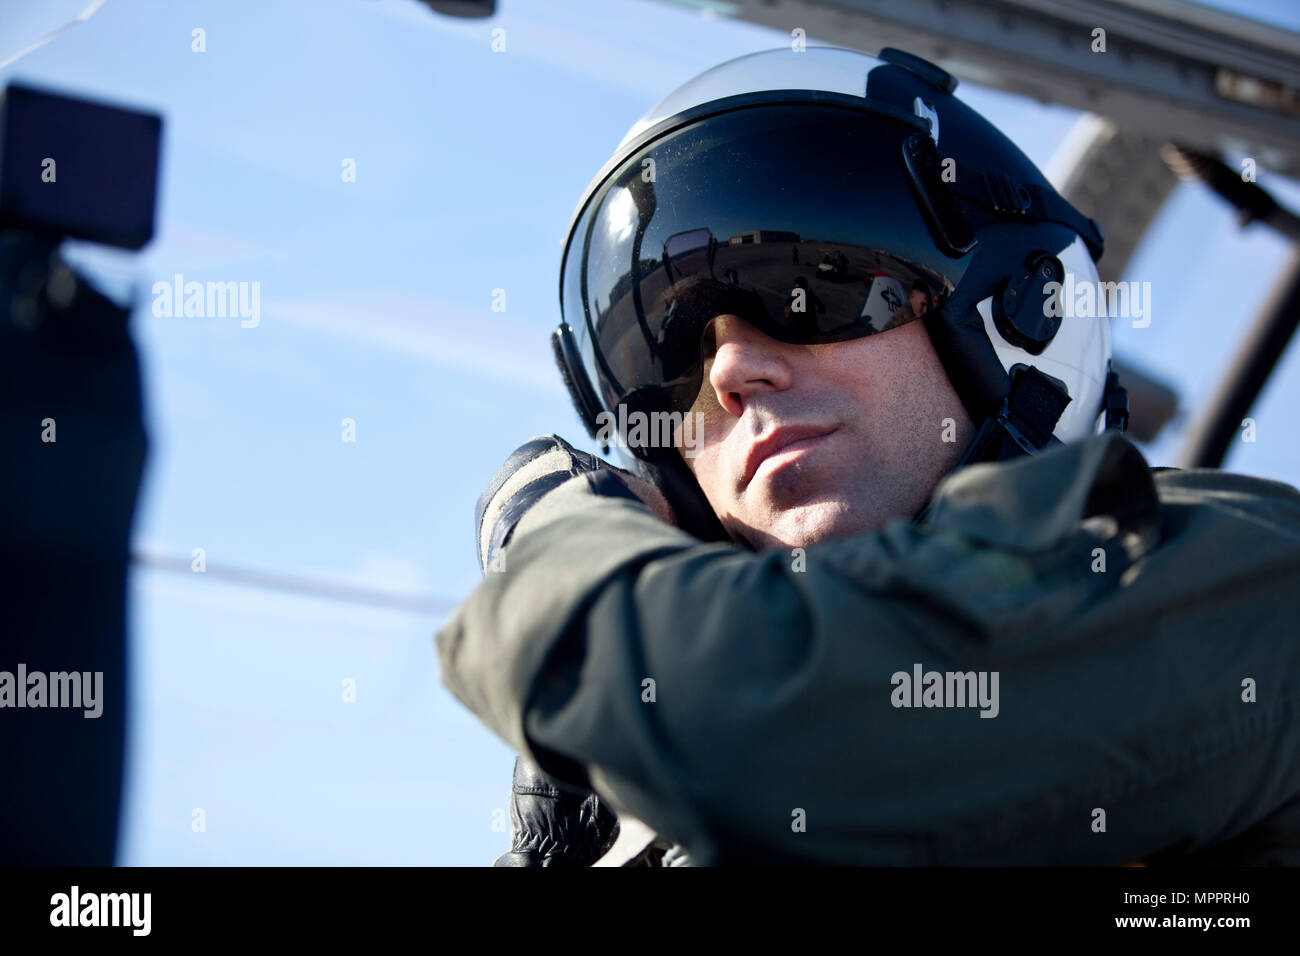 U.S. Marine Corps Capt. Trey Harden, an instructor assigned to the Basic Flight Training Course, Training Air Wing Four, conducts a preflight check on a T-6B training aircraft at Naval Air Station Corpus Christi, Texas, March 20, 2017. The mission of Training Air Wing Four is to provide basic flight training as well as intermediate and advanced flight training using multi-engine aircraft. (U.S. Marine Corps photo by Lance Cpl. Jose Villalobosrocha) Stock Photo